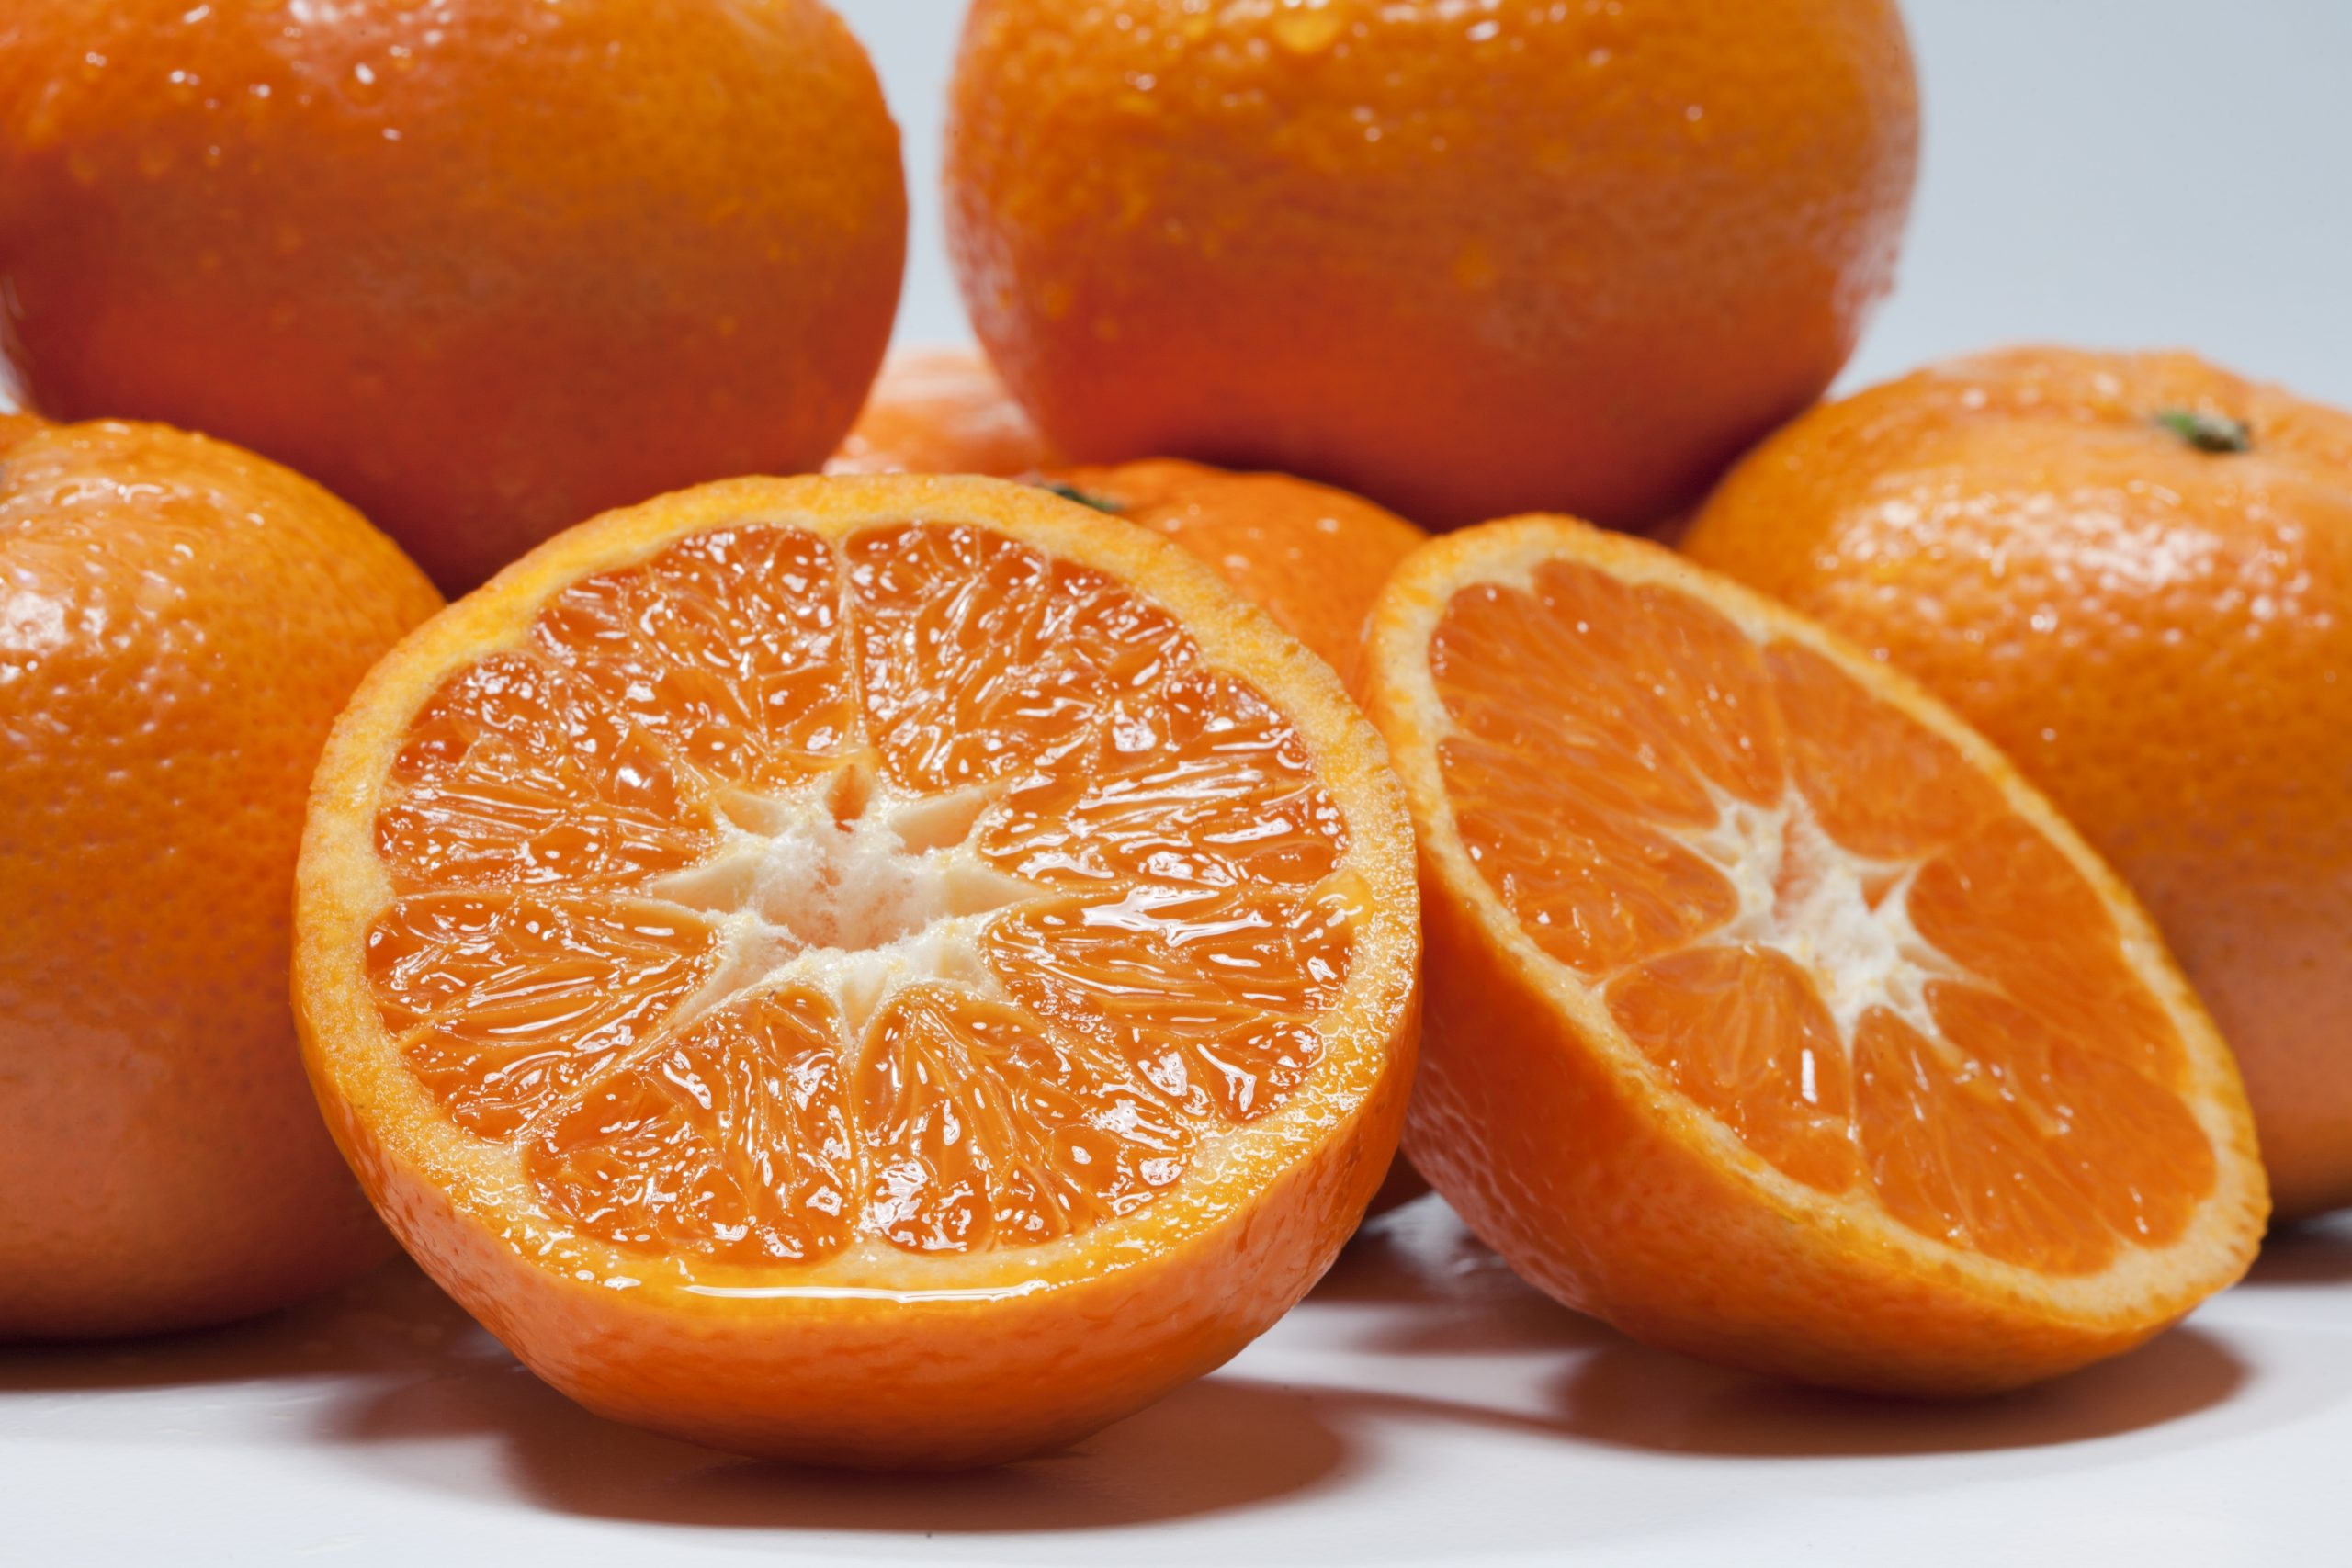 Clemcott is distinguished for being a unique mandarin.Its exceptional features; homogeneity in the fruit, intense colour, easy to peel, exquisite aroma and taste, among others, make this excellent fruit unique, one that experts and consumers know how to appreciate and value.